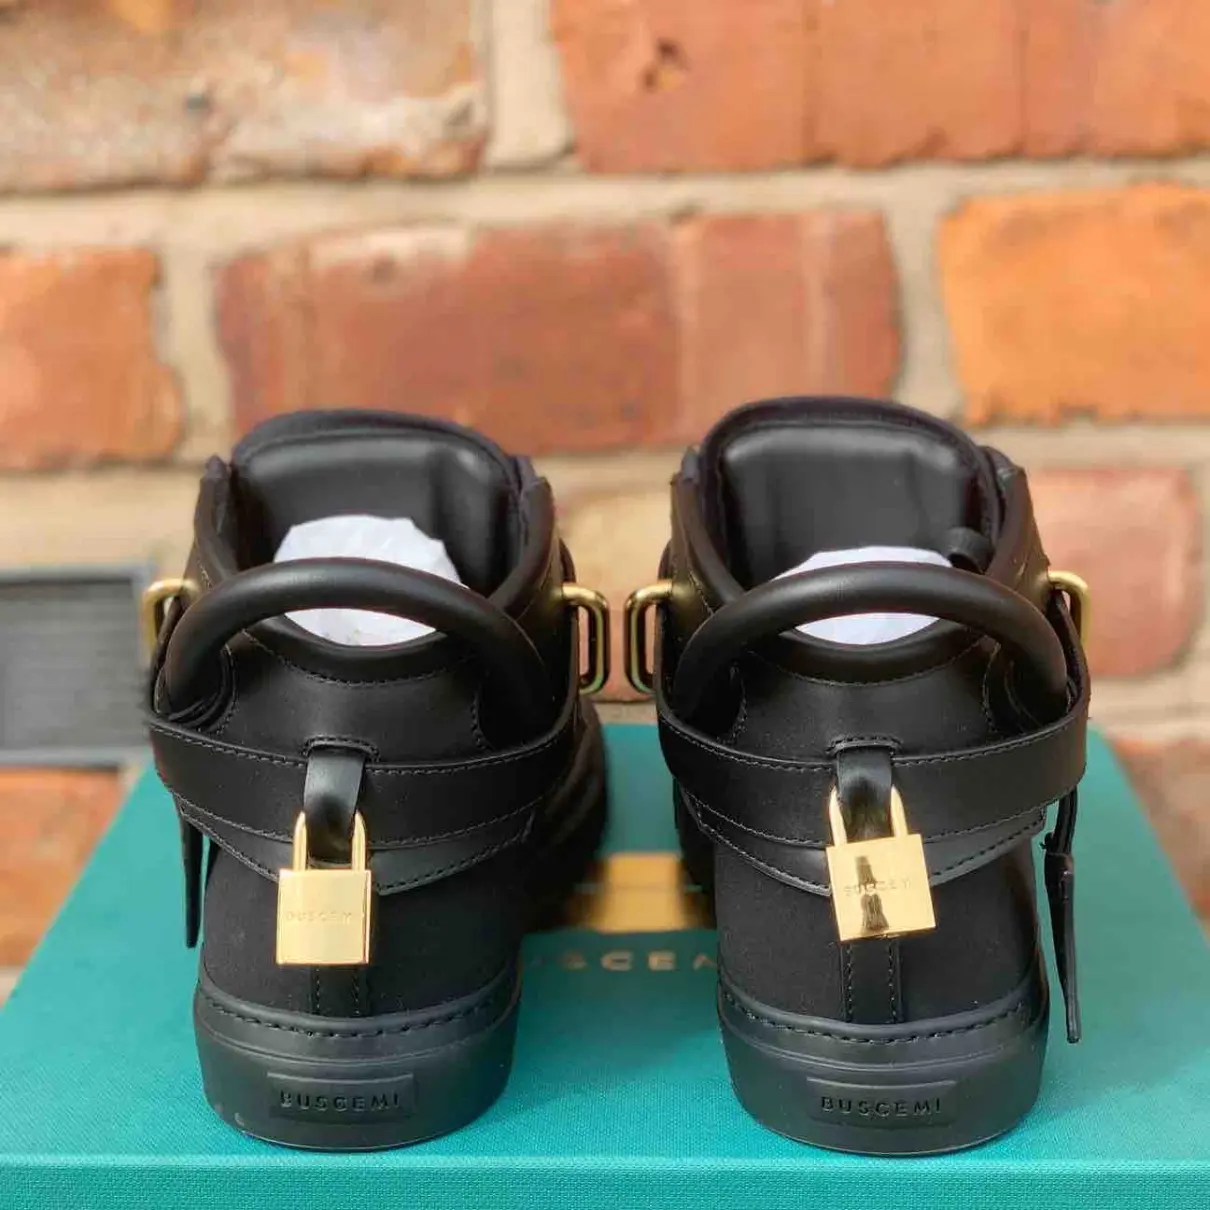 Buy Buscemi Cloth high trainers online